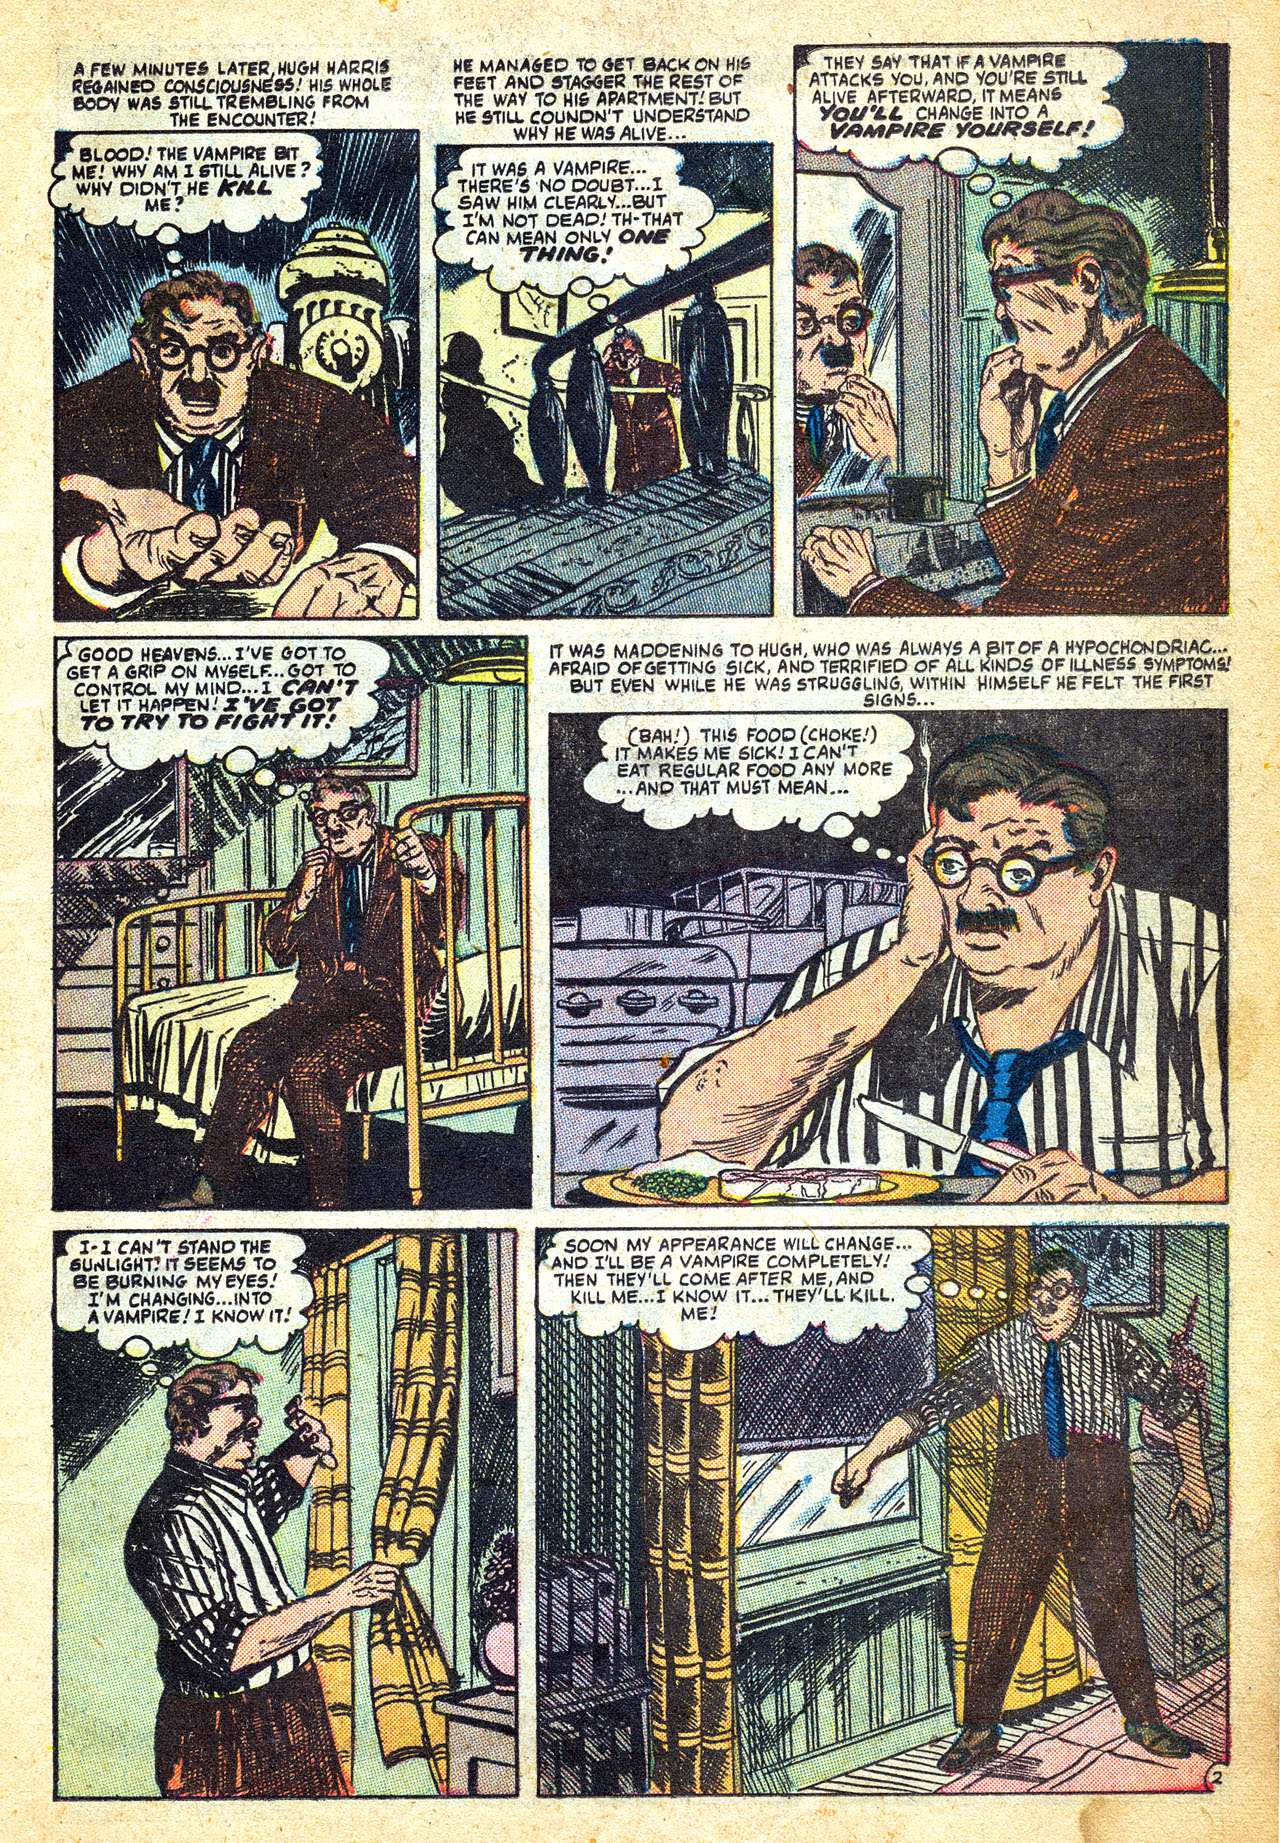 Marvel Tales (1949) 123 Page 10